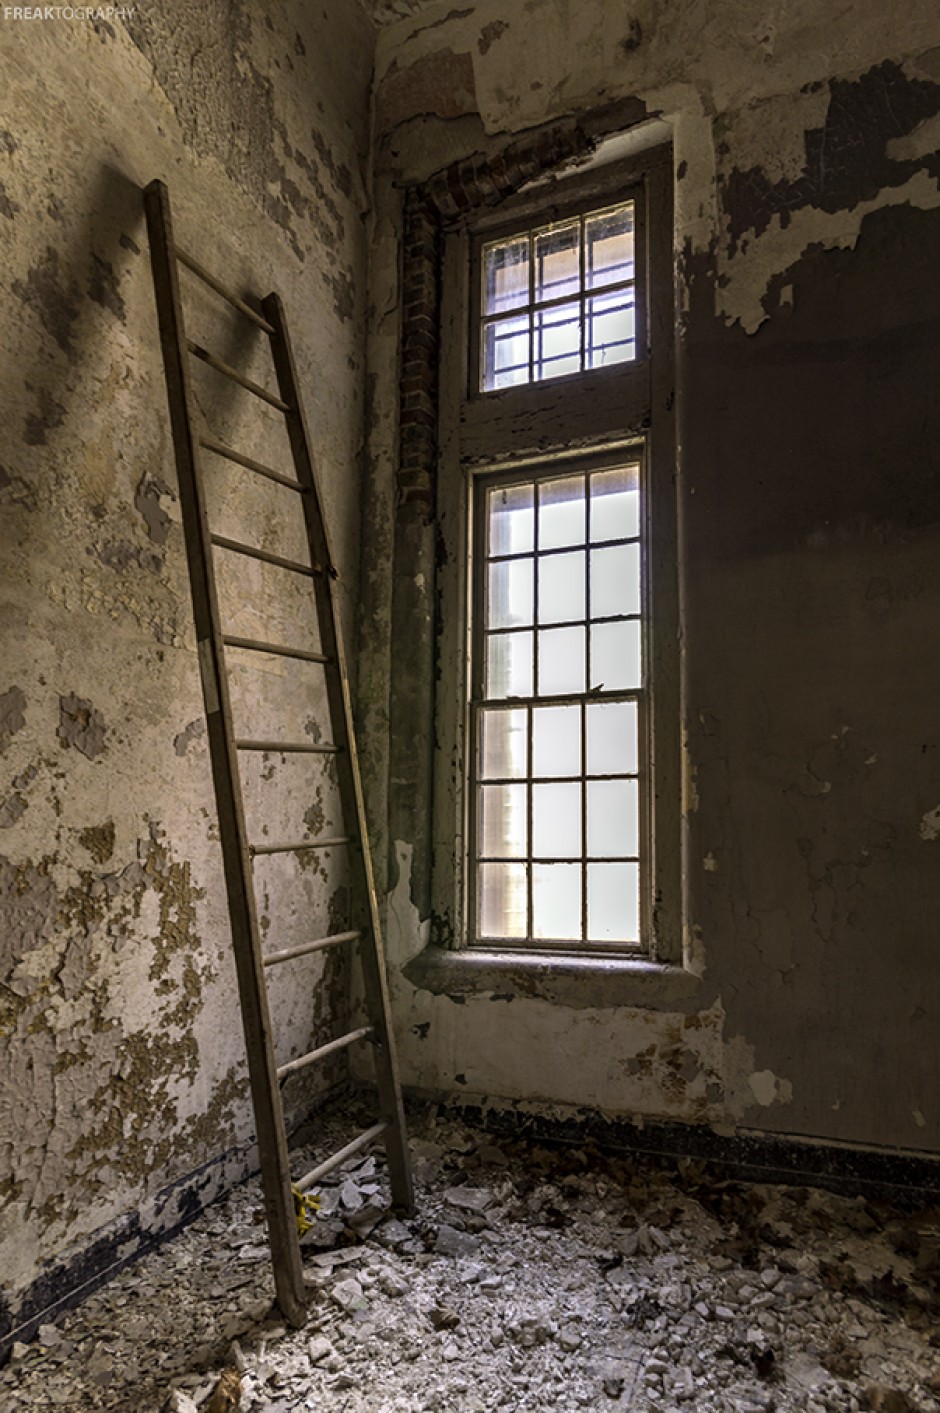 Buffalo State Asylum in the Freaktography Photo of the Day